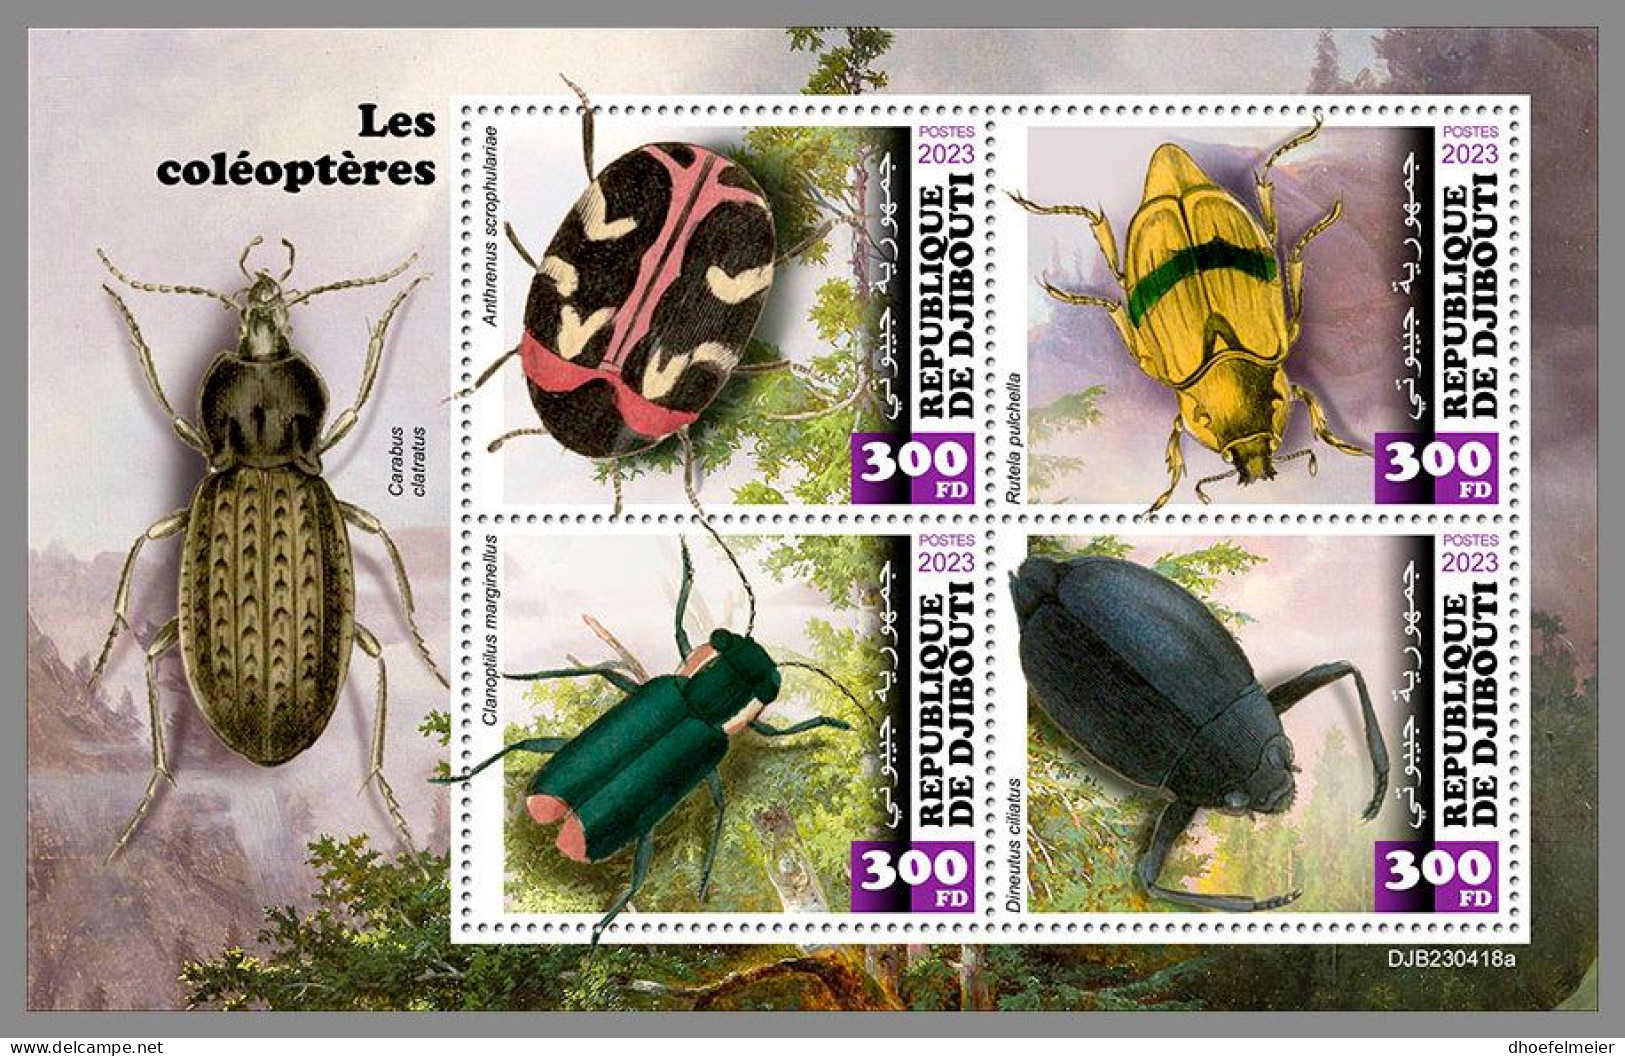 DJIBOUTI 2023 MNH Beetles Käfer M/S – OFFICIAL ISSUE – DHQ2420 - Beetles